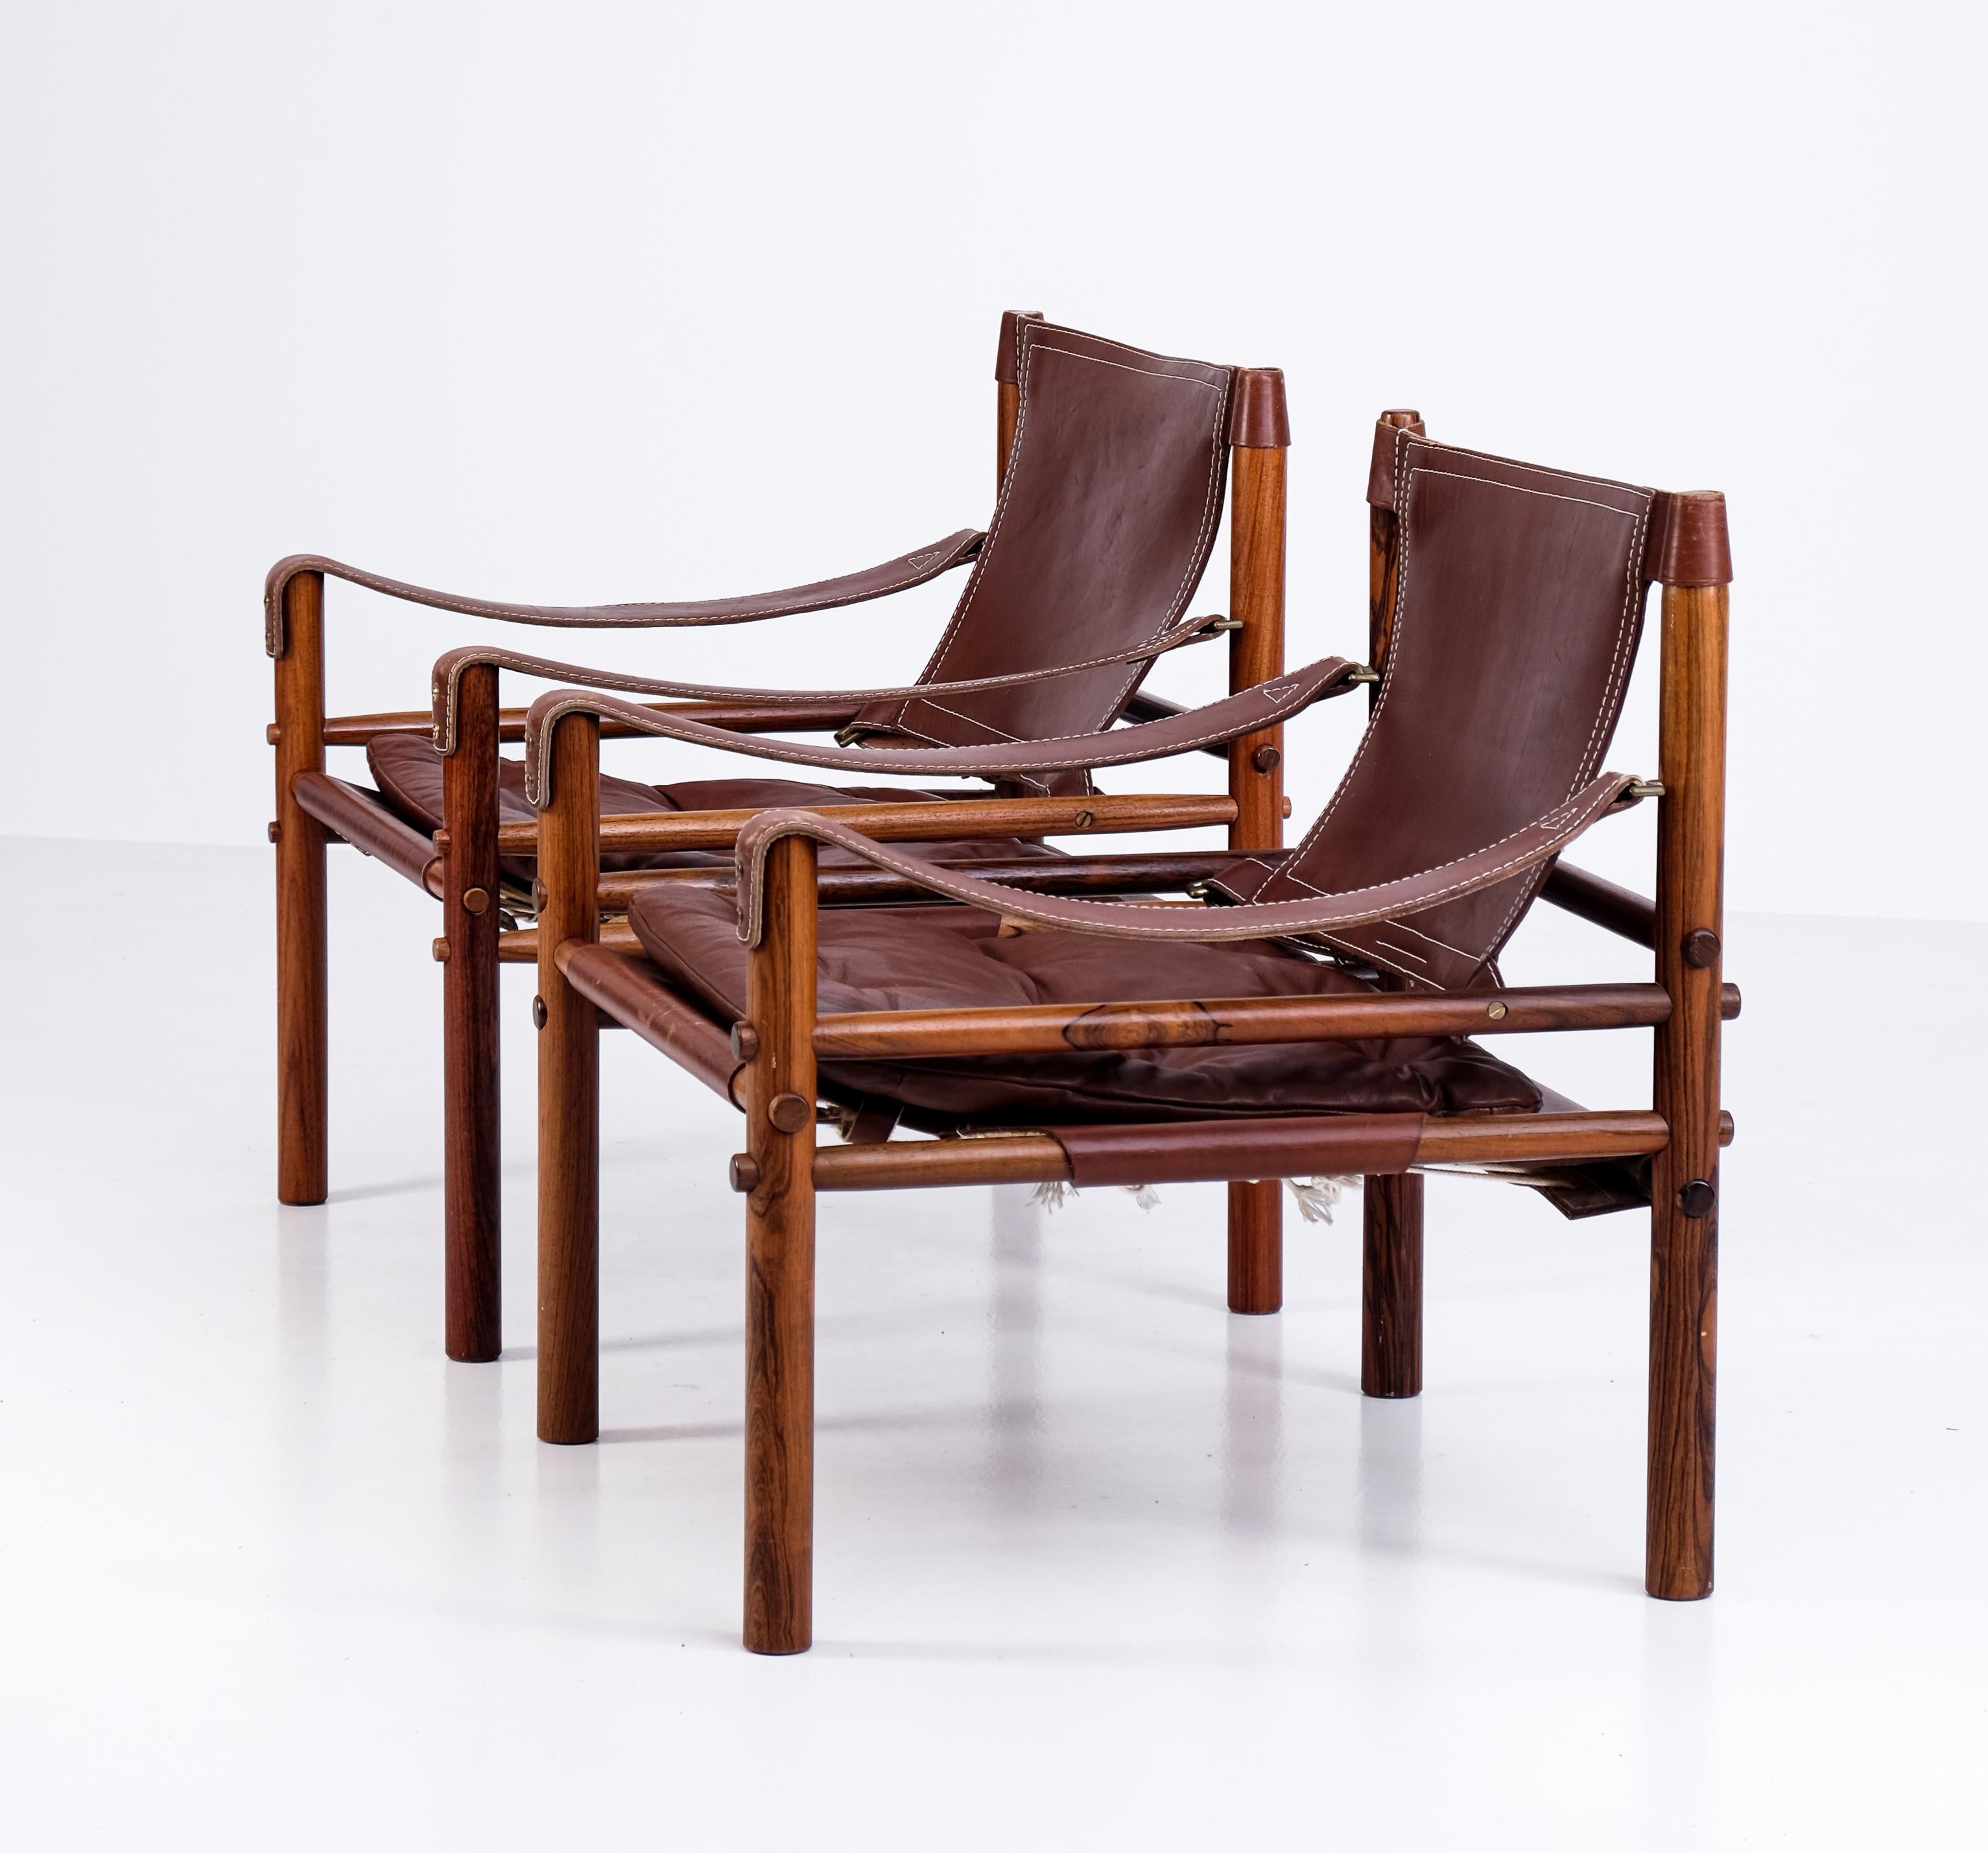 Excellent pair of safari chairs model Sirocco in good condition with original brown leather.
Designed by Arne Norell, produced by Arne Norell AB in Aneby, Sweden, 1970s.
  




